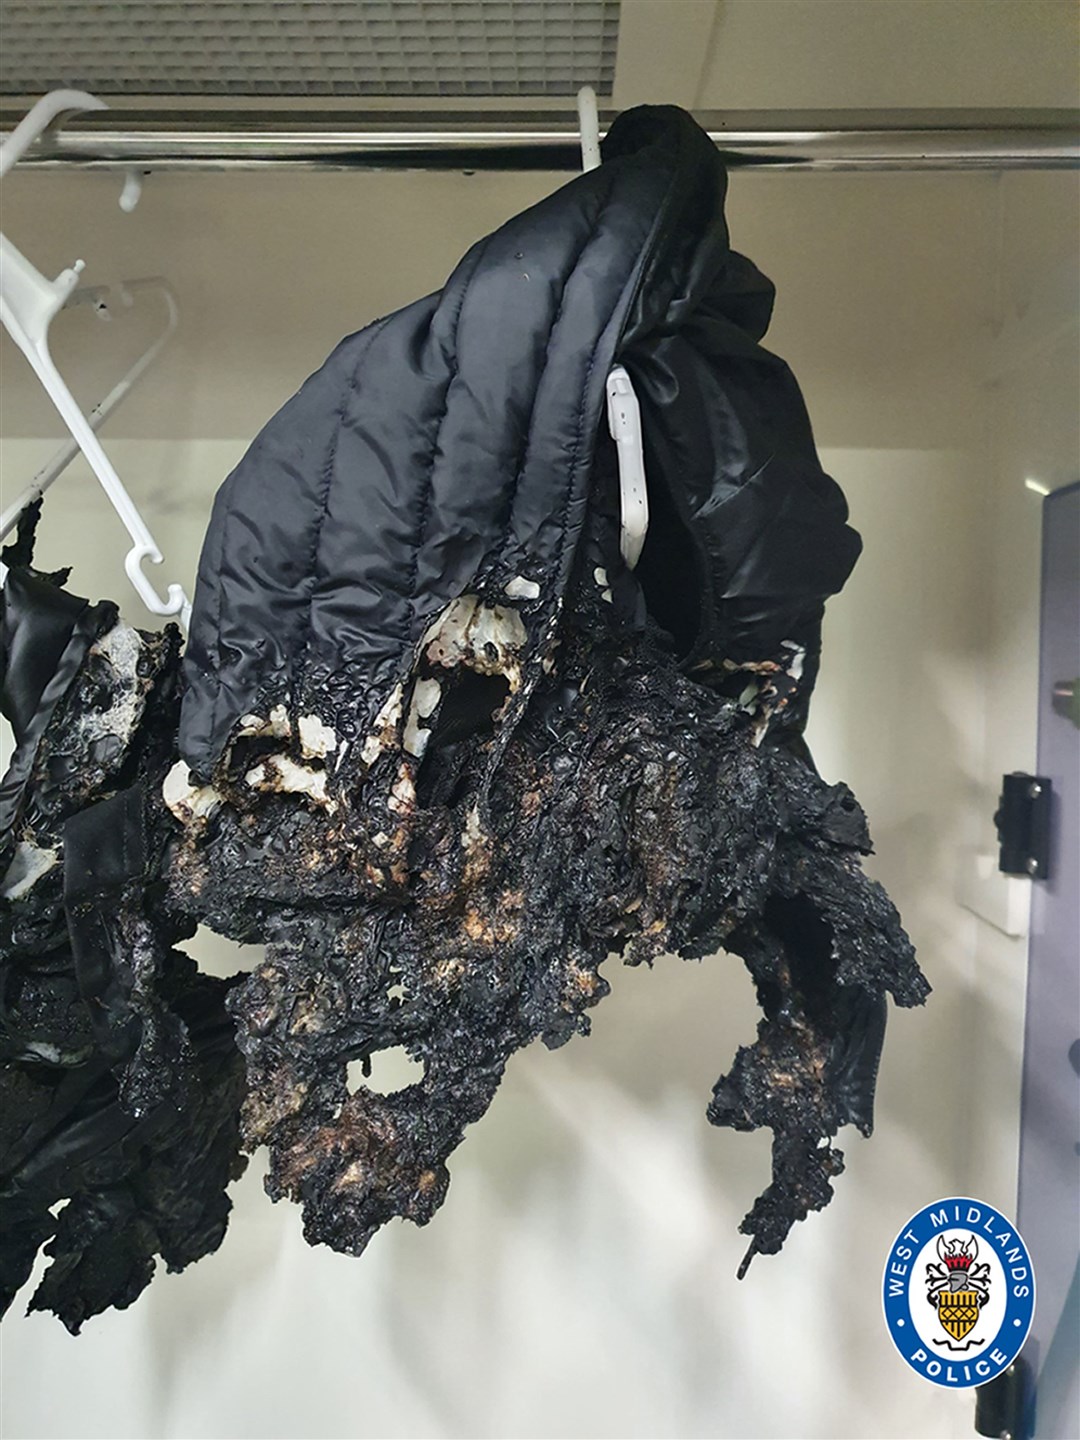 The burned clothing of Mohammed Rayaz after the attack (West Midlands Police/PA)